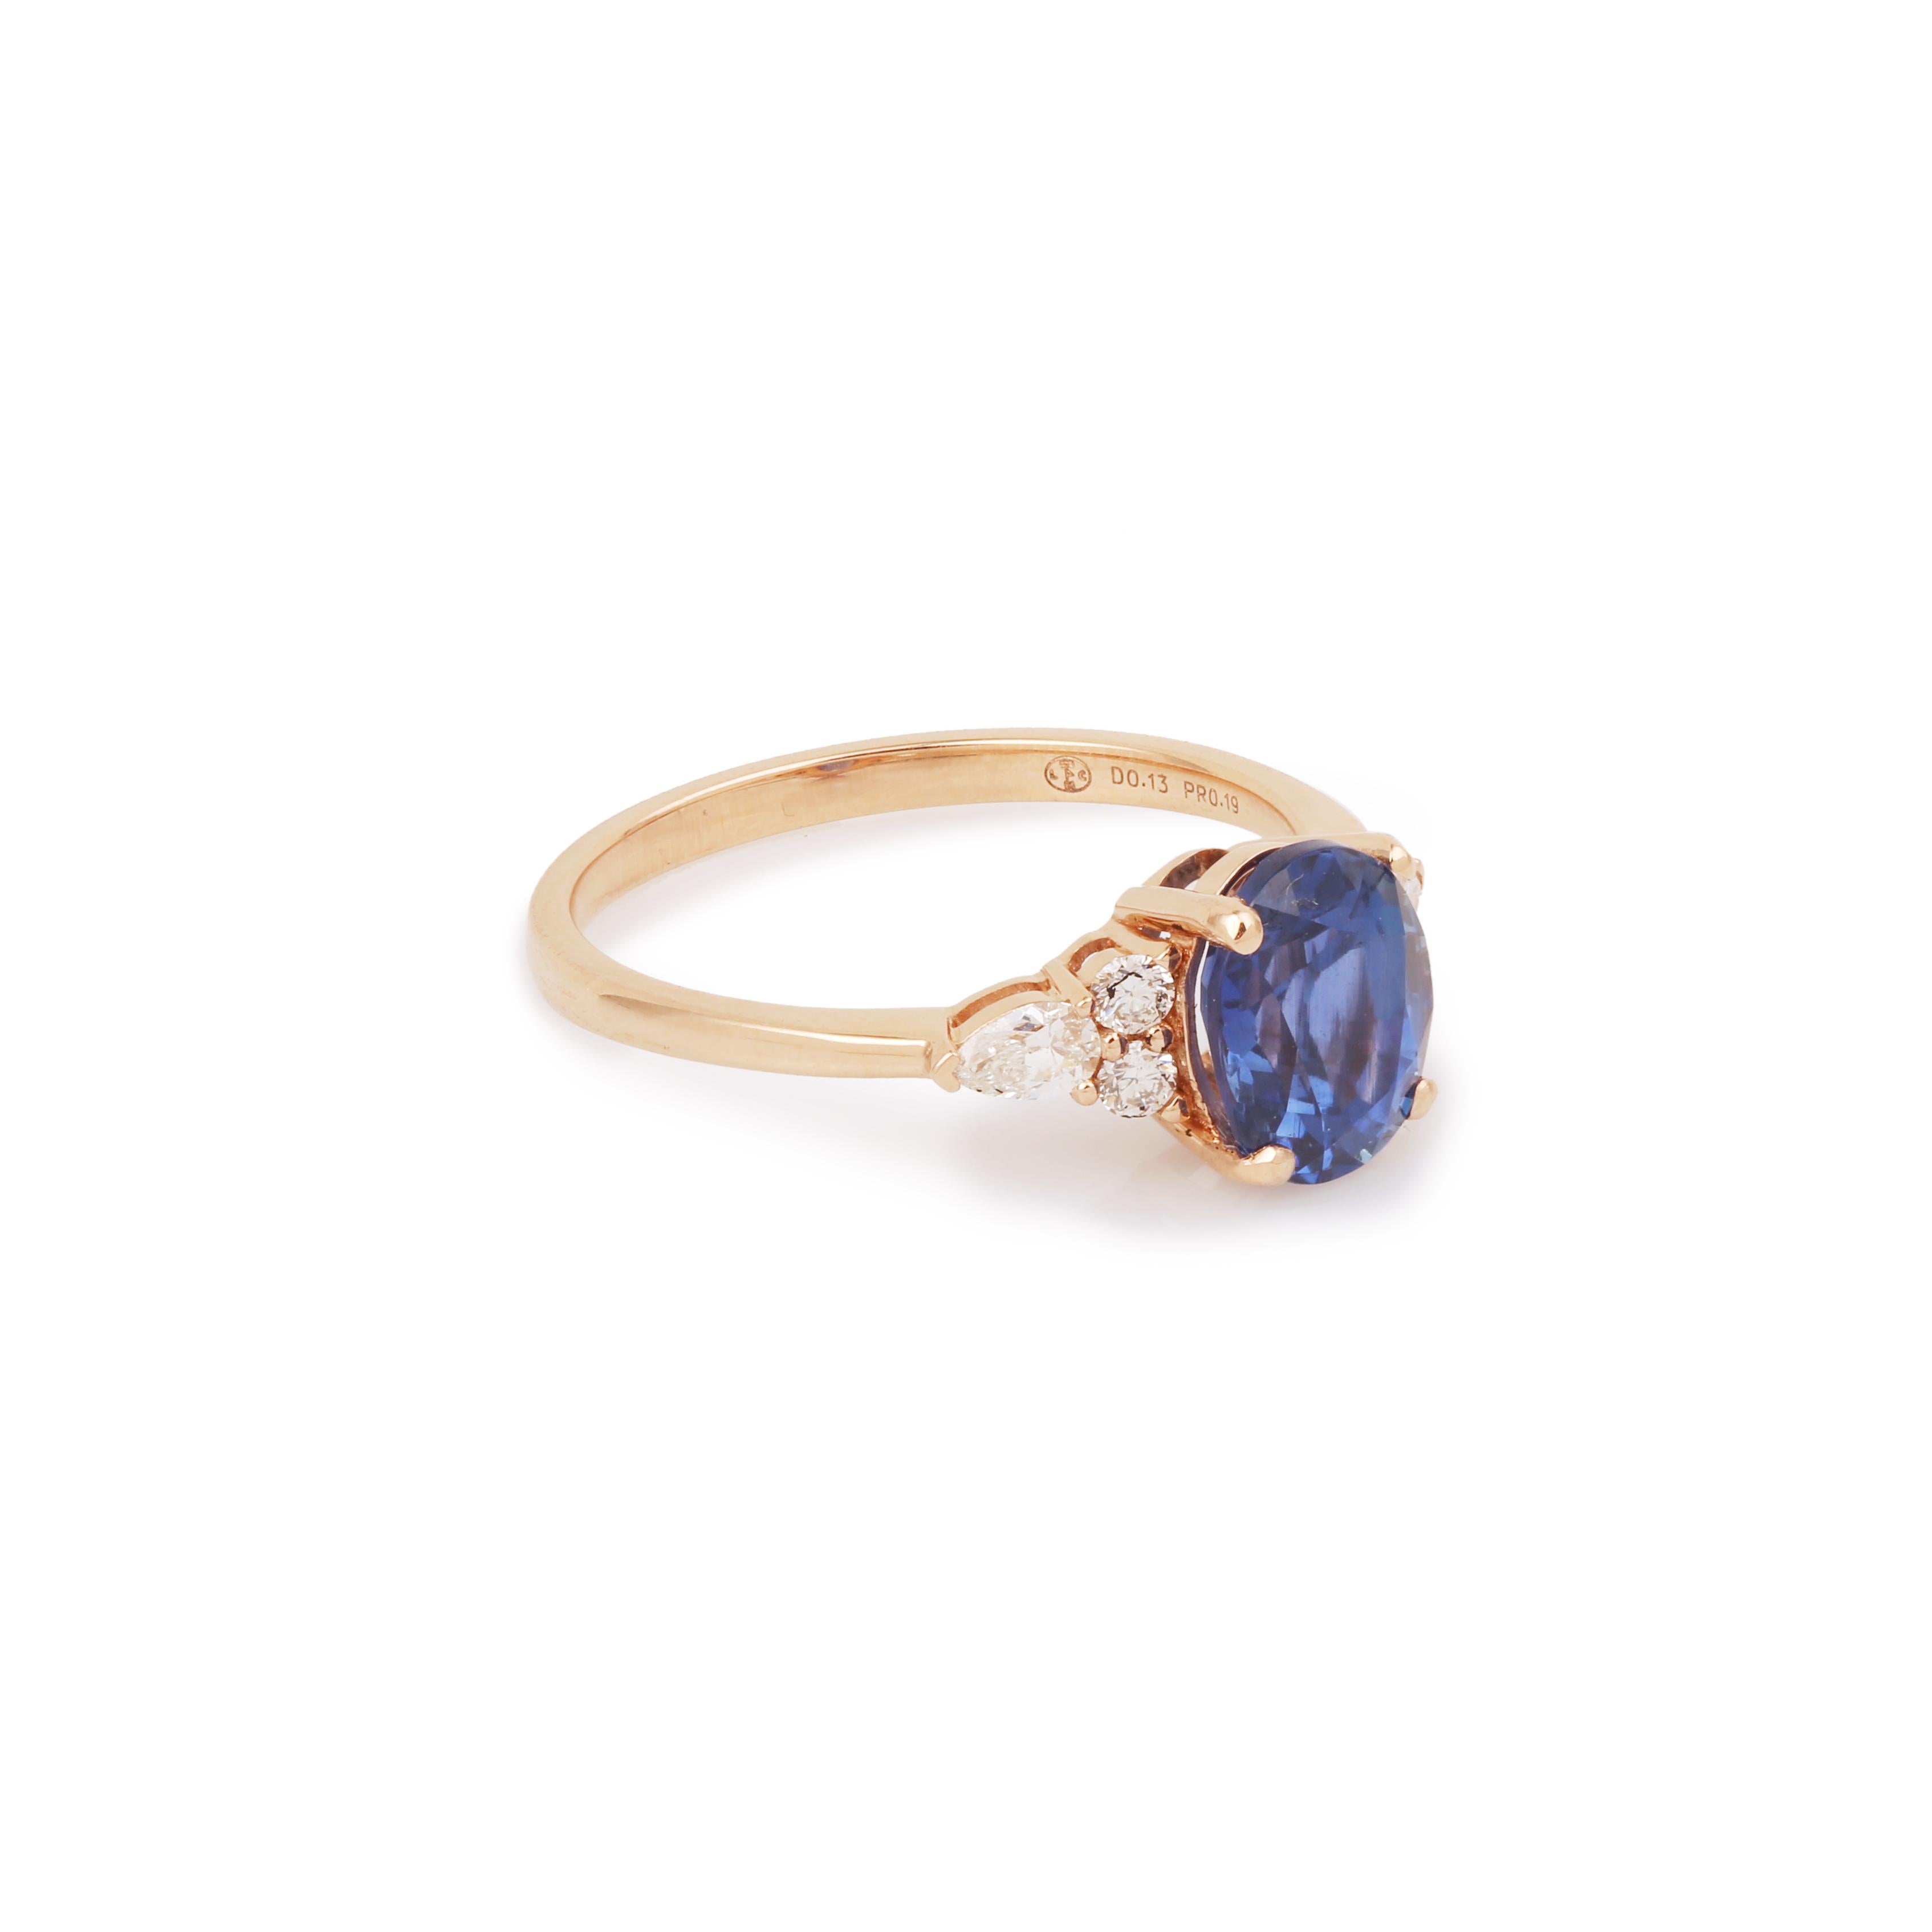 A rose gold ring set with a 2.25-carat unheated oval-cut sapphire set with brilliant and pear-cut diamonds.

Ideal for an engagement!

Sapphire weight: 2.25 carats

With Gem Paris certificate, specifying natural sapphire, no indication of treatment,